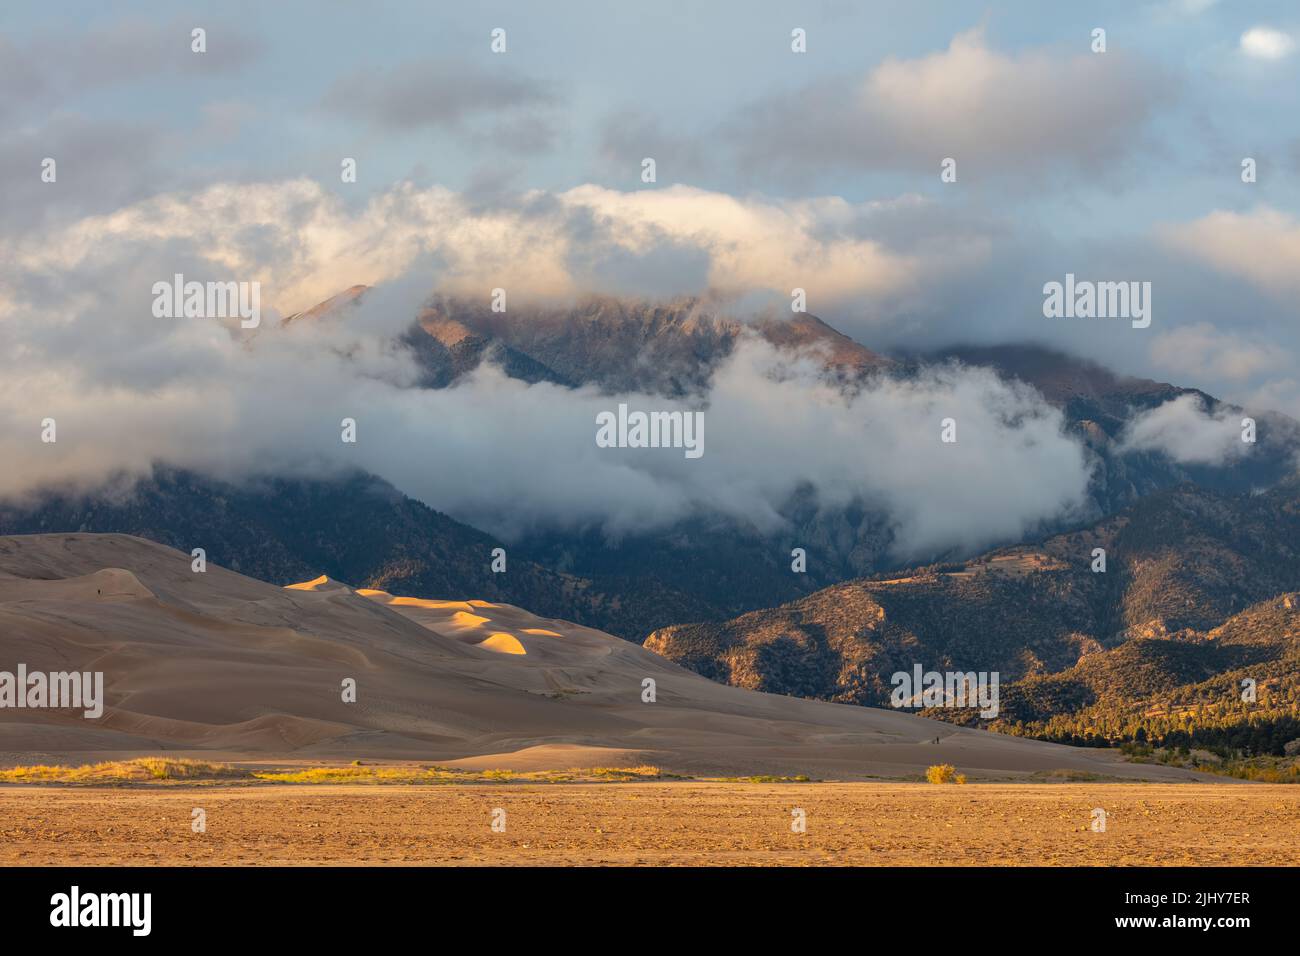 Evening light on the dunes and mountains, Great Sand Dunes National Park, Colorado Stock Photo